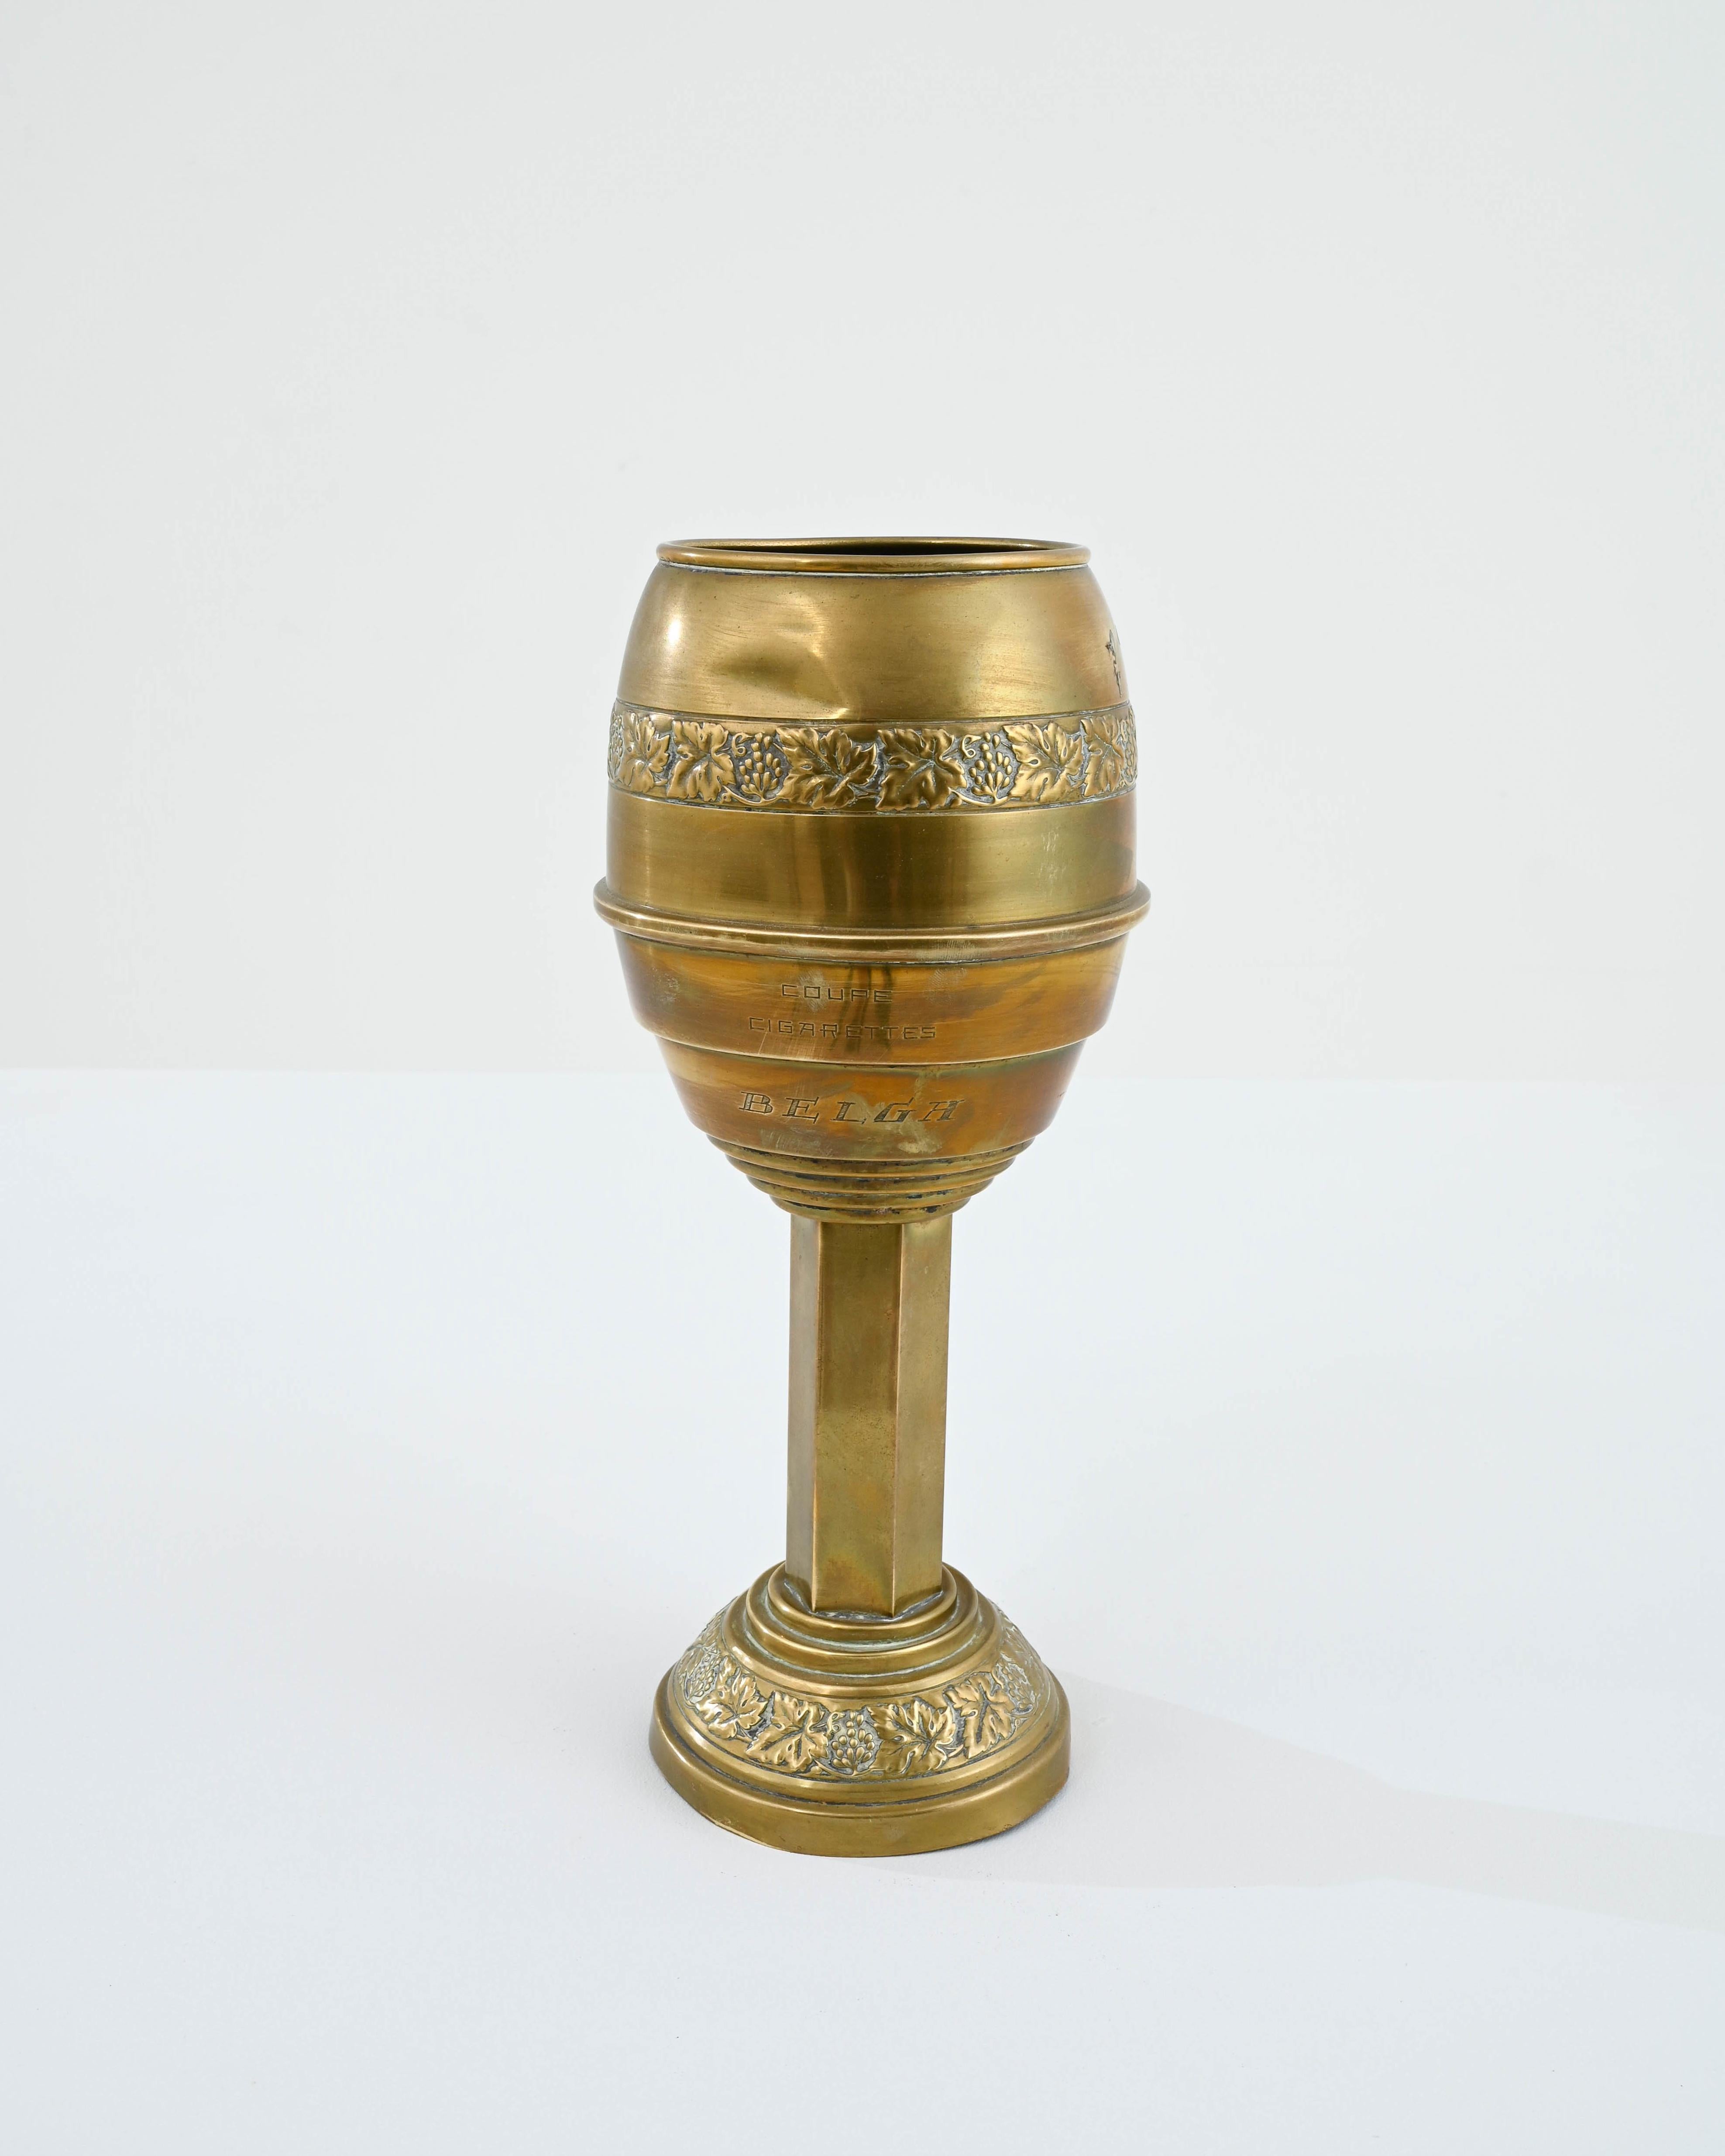 With its ornate metalwork and beautiful golden gleam, this vintage brass goblet has the air of an object from a fairytale. Made in France in the 20th century, intricate patterns of embossed grapes and vine leaves decorate the swell of the cup and